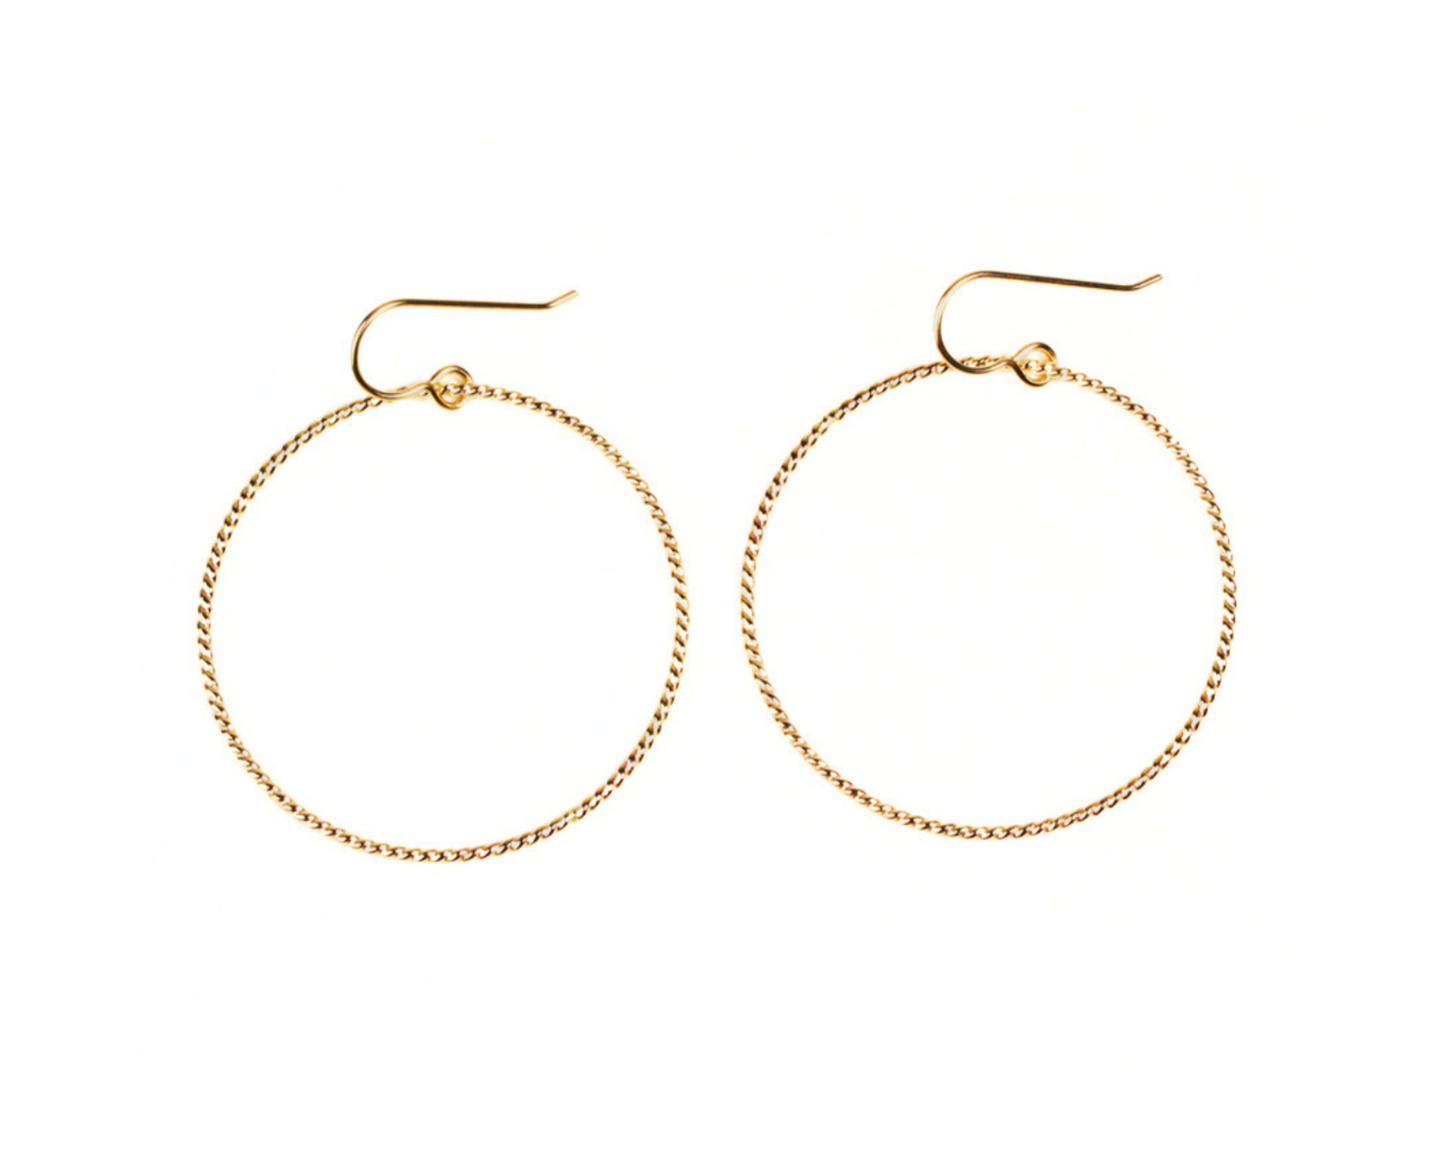 These twisted drop hoop earrings make an ideal wedding gift or anniversary gift, as they can symbolize infinite togetherness. Bring elevated charm to your wardrobe with the Twisted Hoop Earrings and discover an instant favorite.